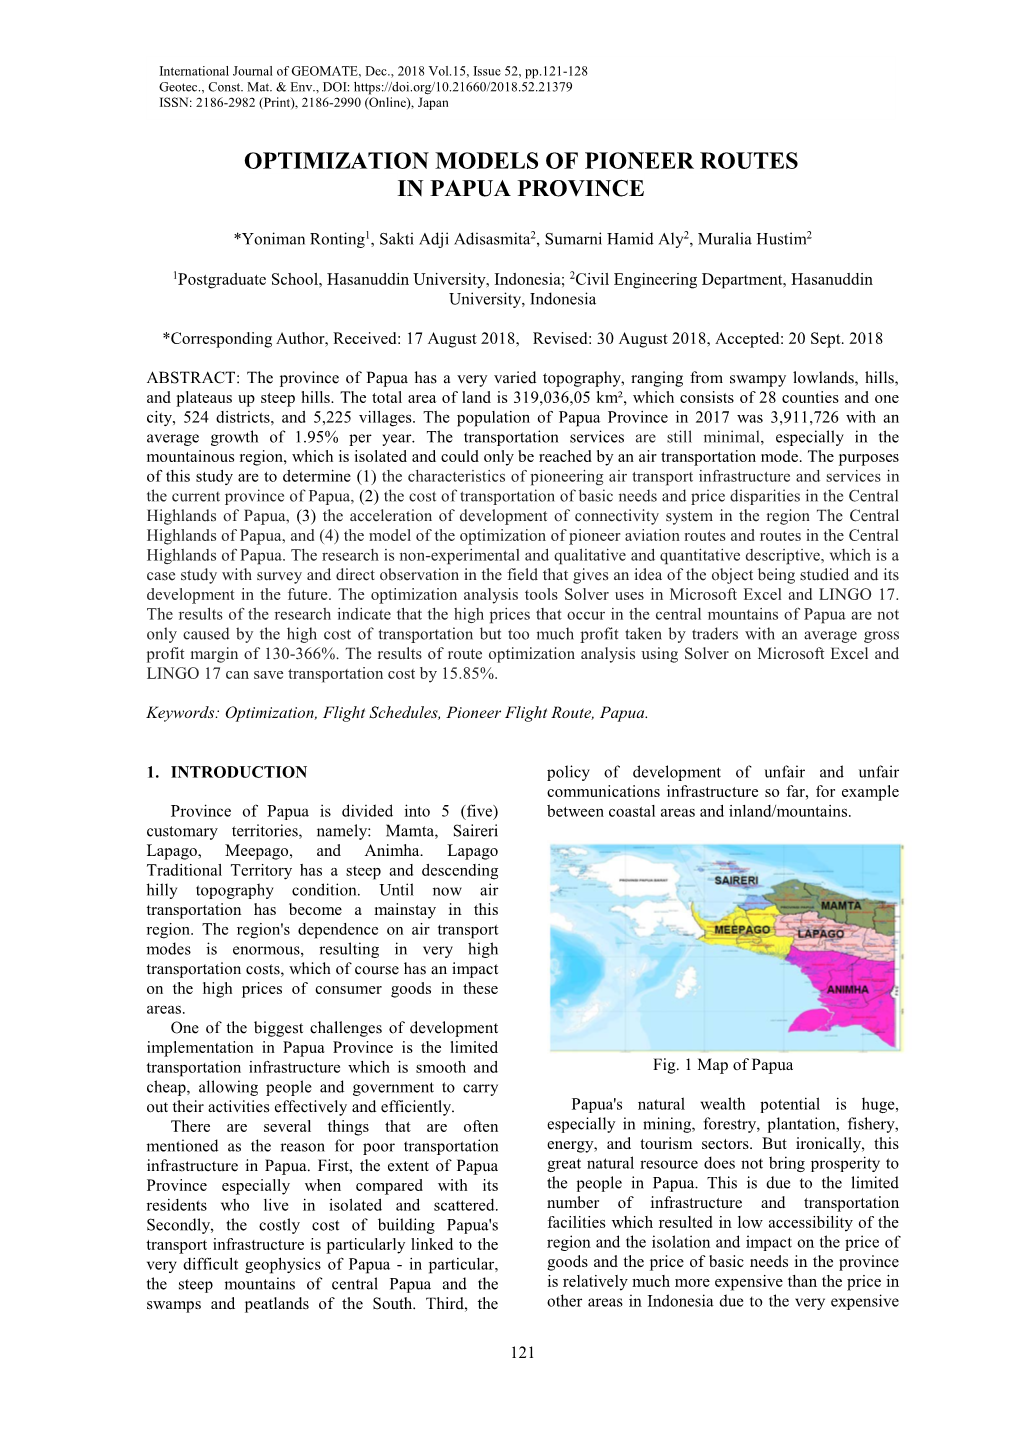 Optimization Models of Pioneer Routes in Papua Province